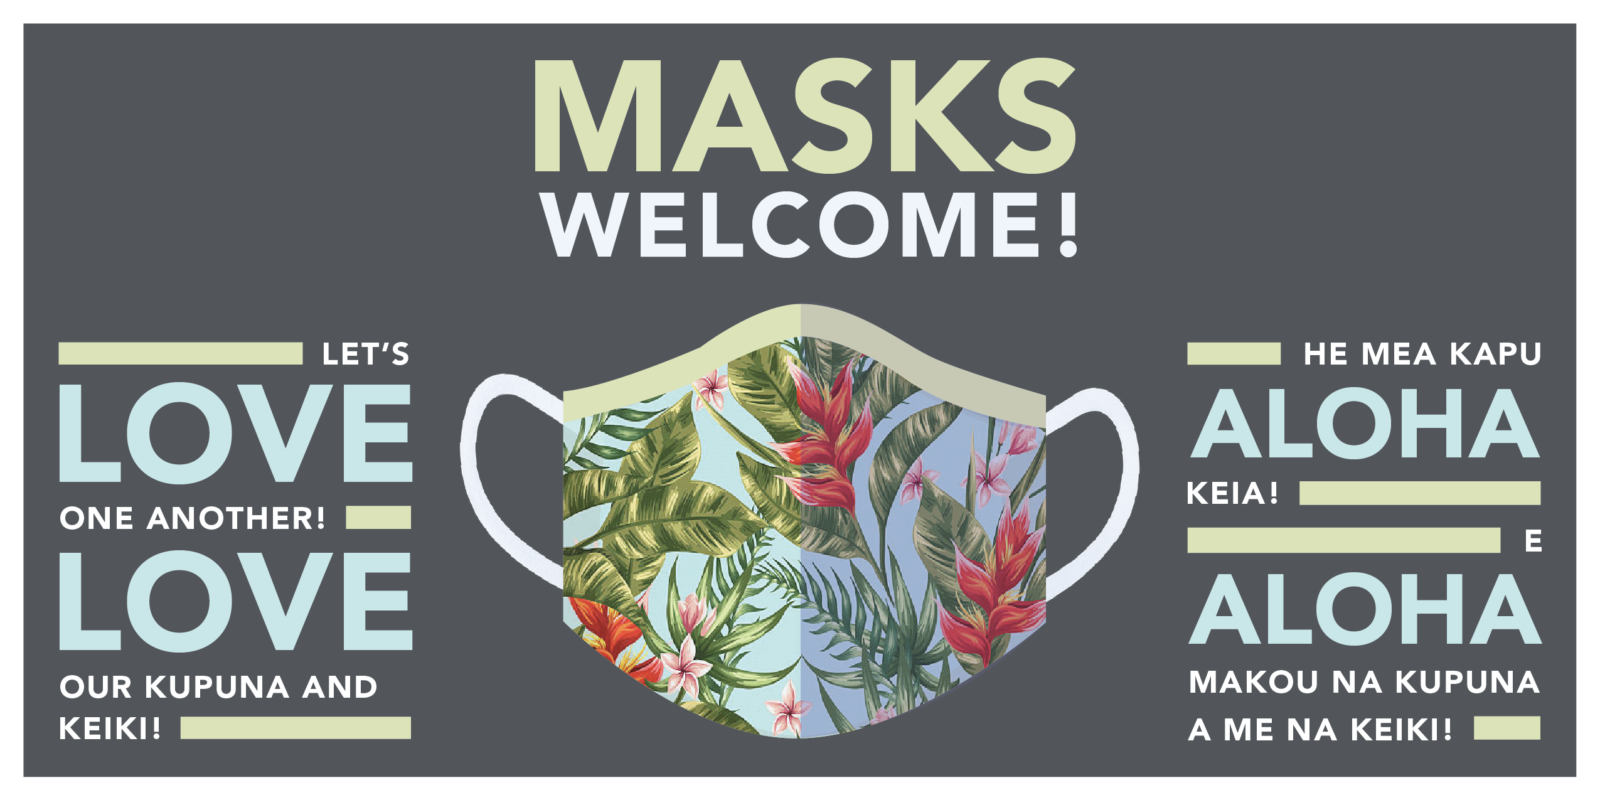 Masks Welcome